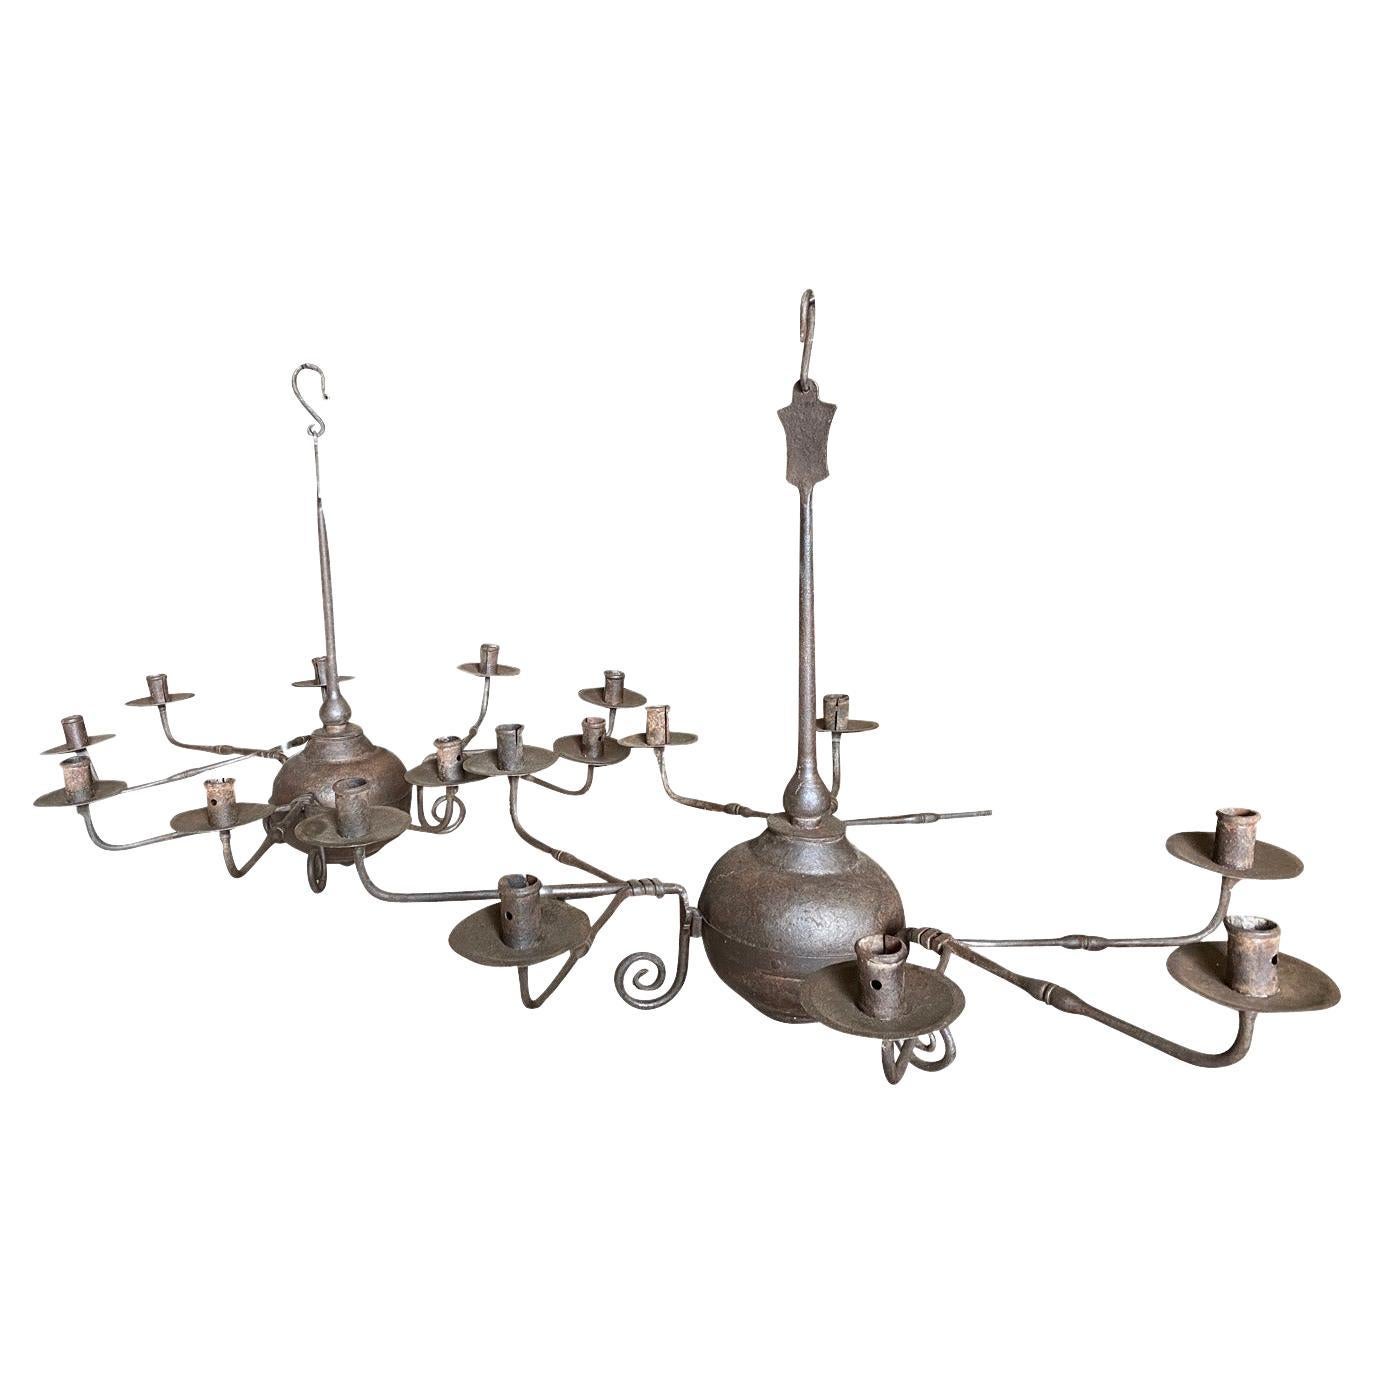 A very handsome pair of 18th century Chandeliers from Udine, Italy.  Wonderfully crafted from beautifully patina'd iron.  Each with 9 lights. The arms are removable.